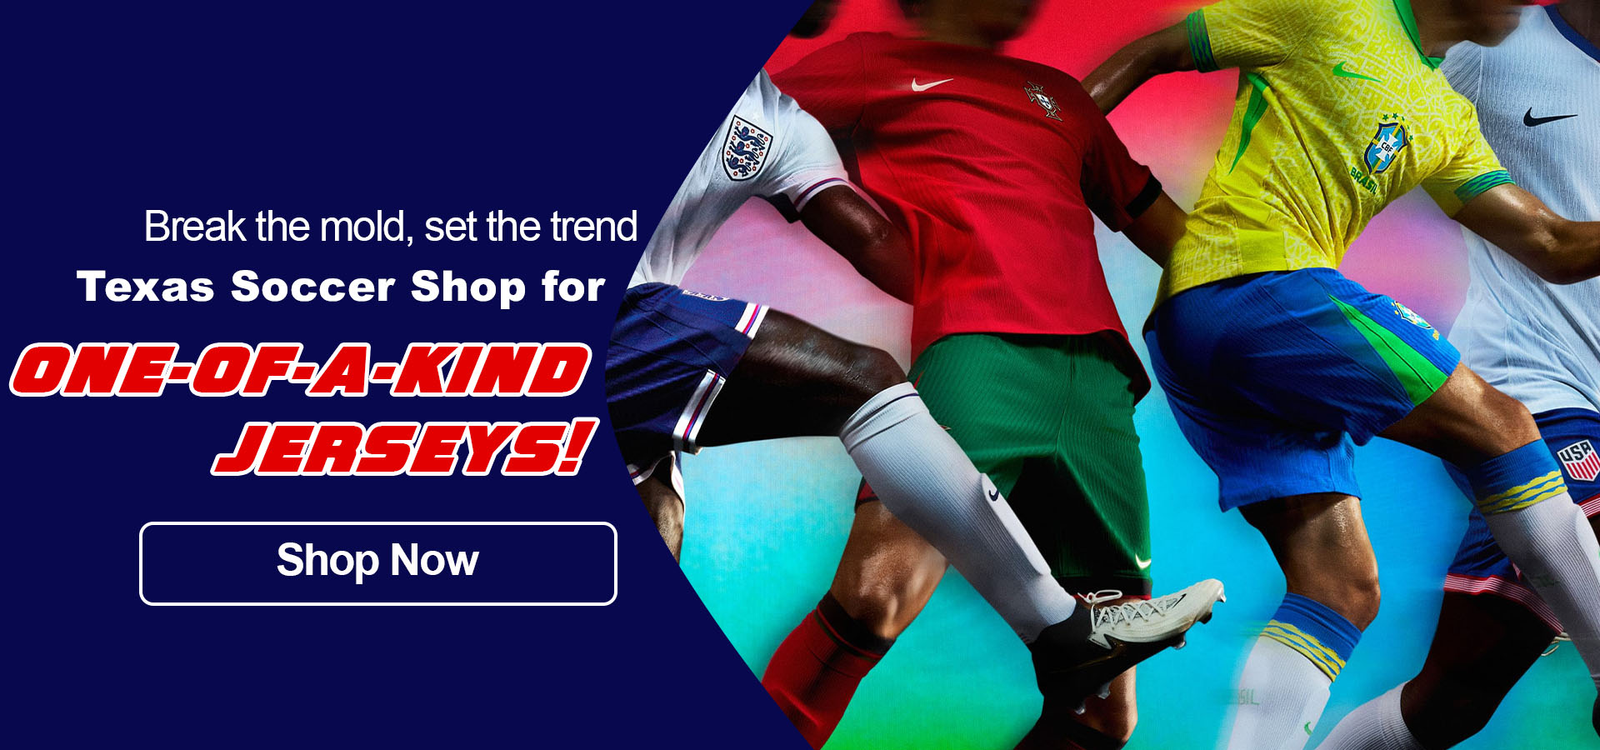 Break the mold, set the trend, Texas Soccer Shop for One of a Kind Jerseys!